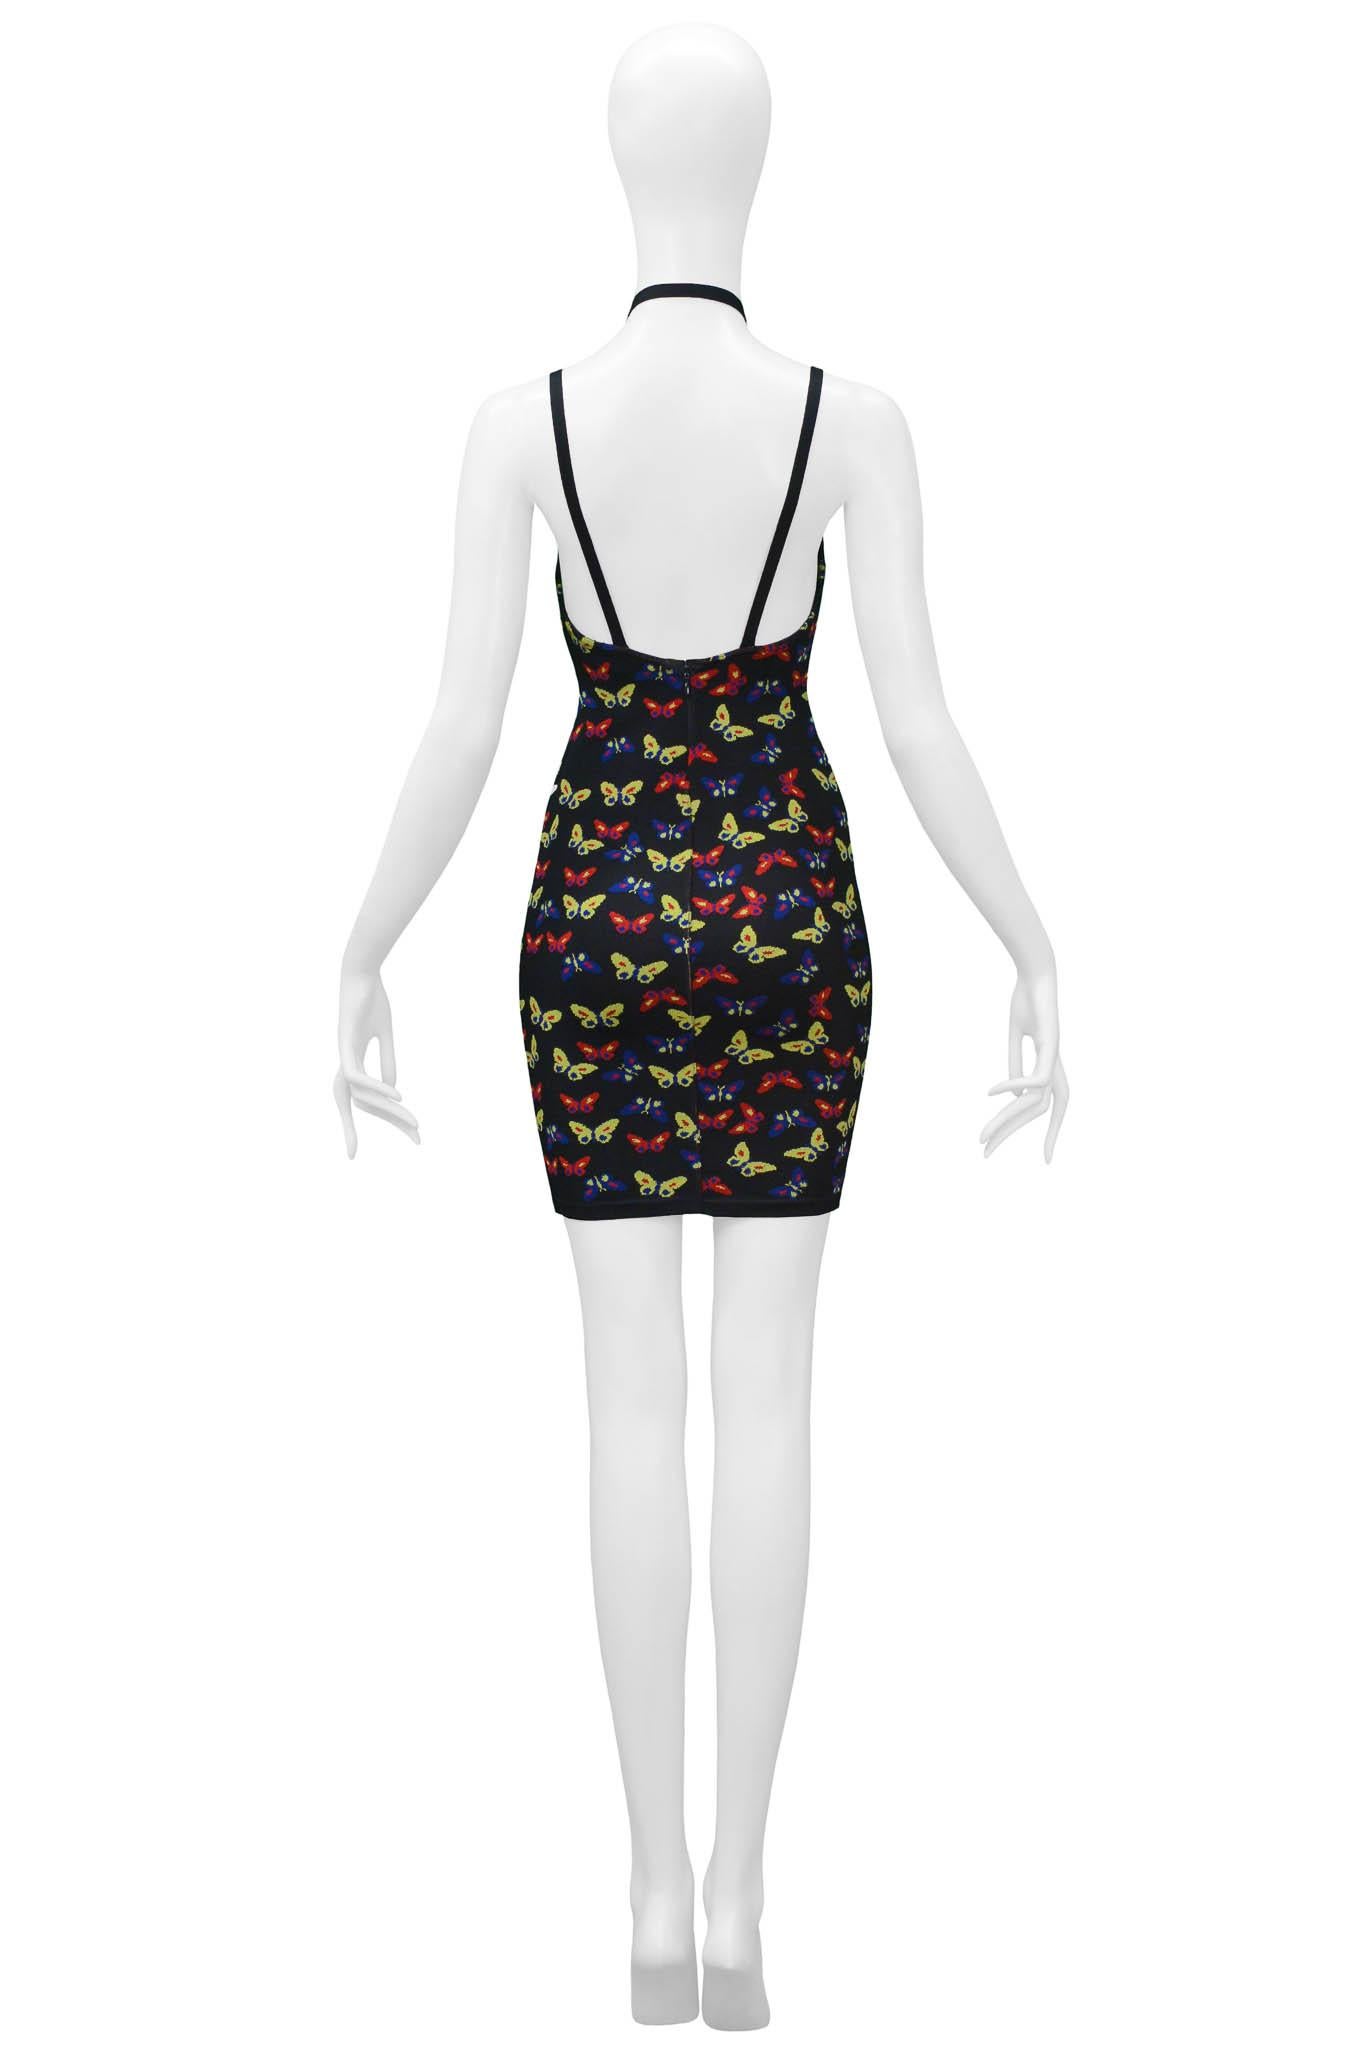 Azzedine Alaia Iconic Butterly Print Knit Dress 1991 In Excellent Condition For Sale In Los Angeles, CA